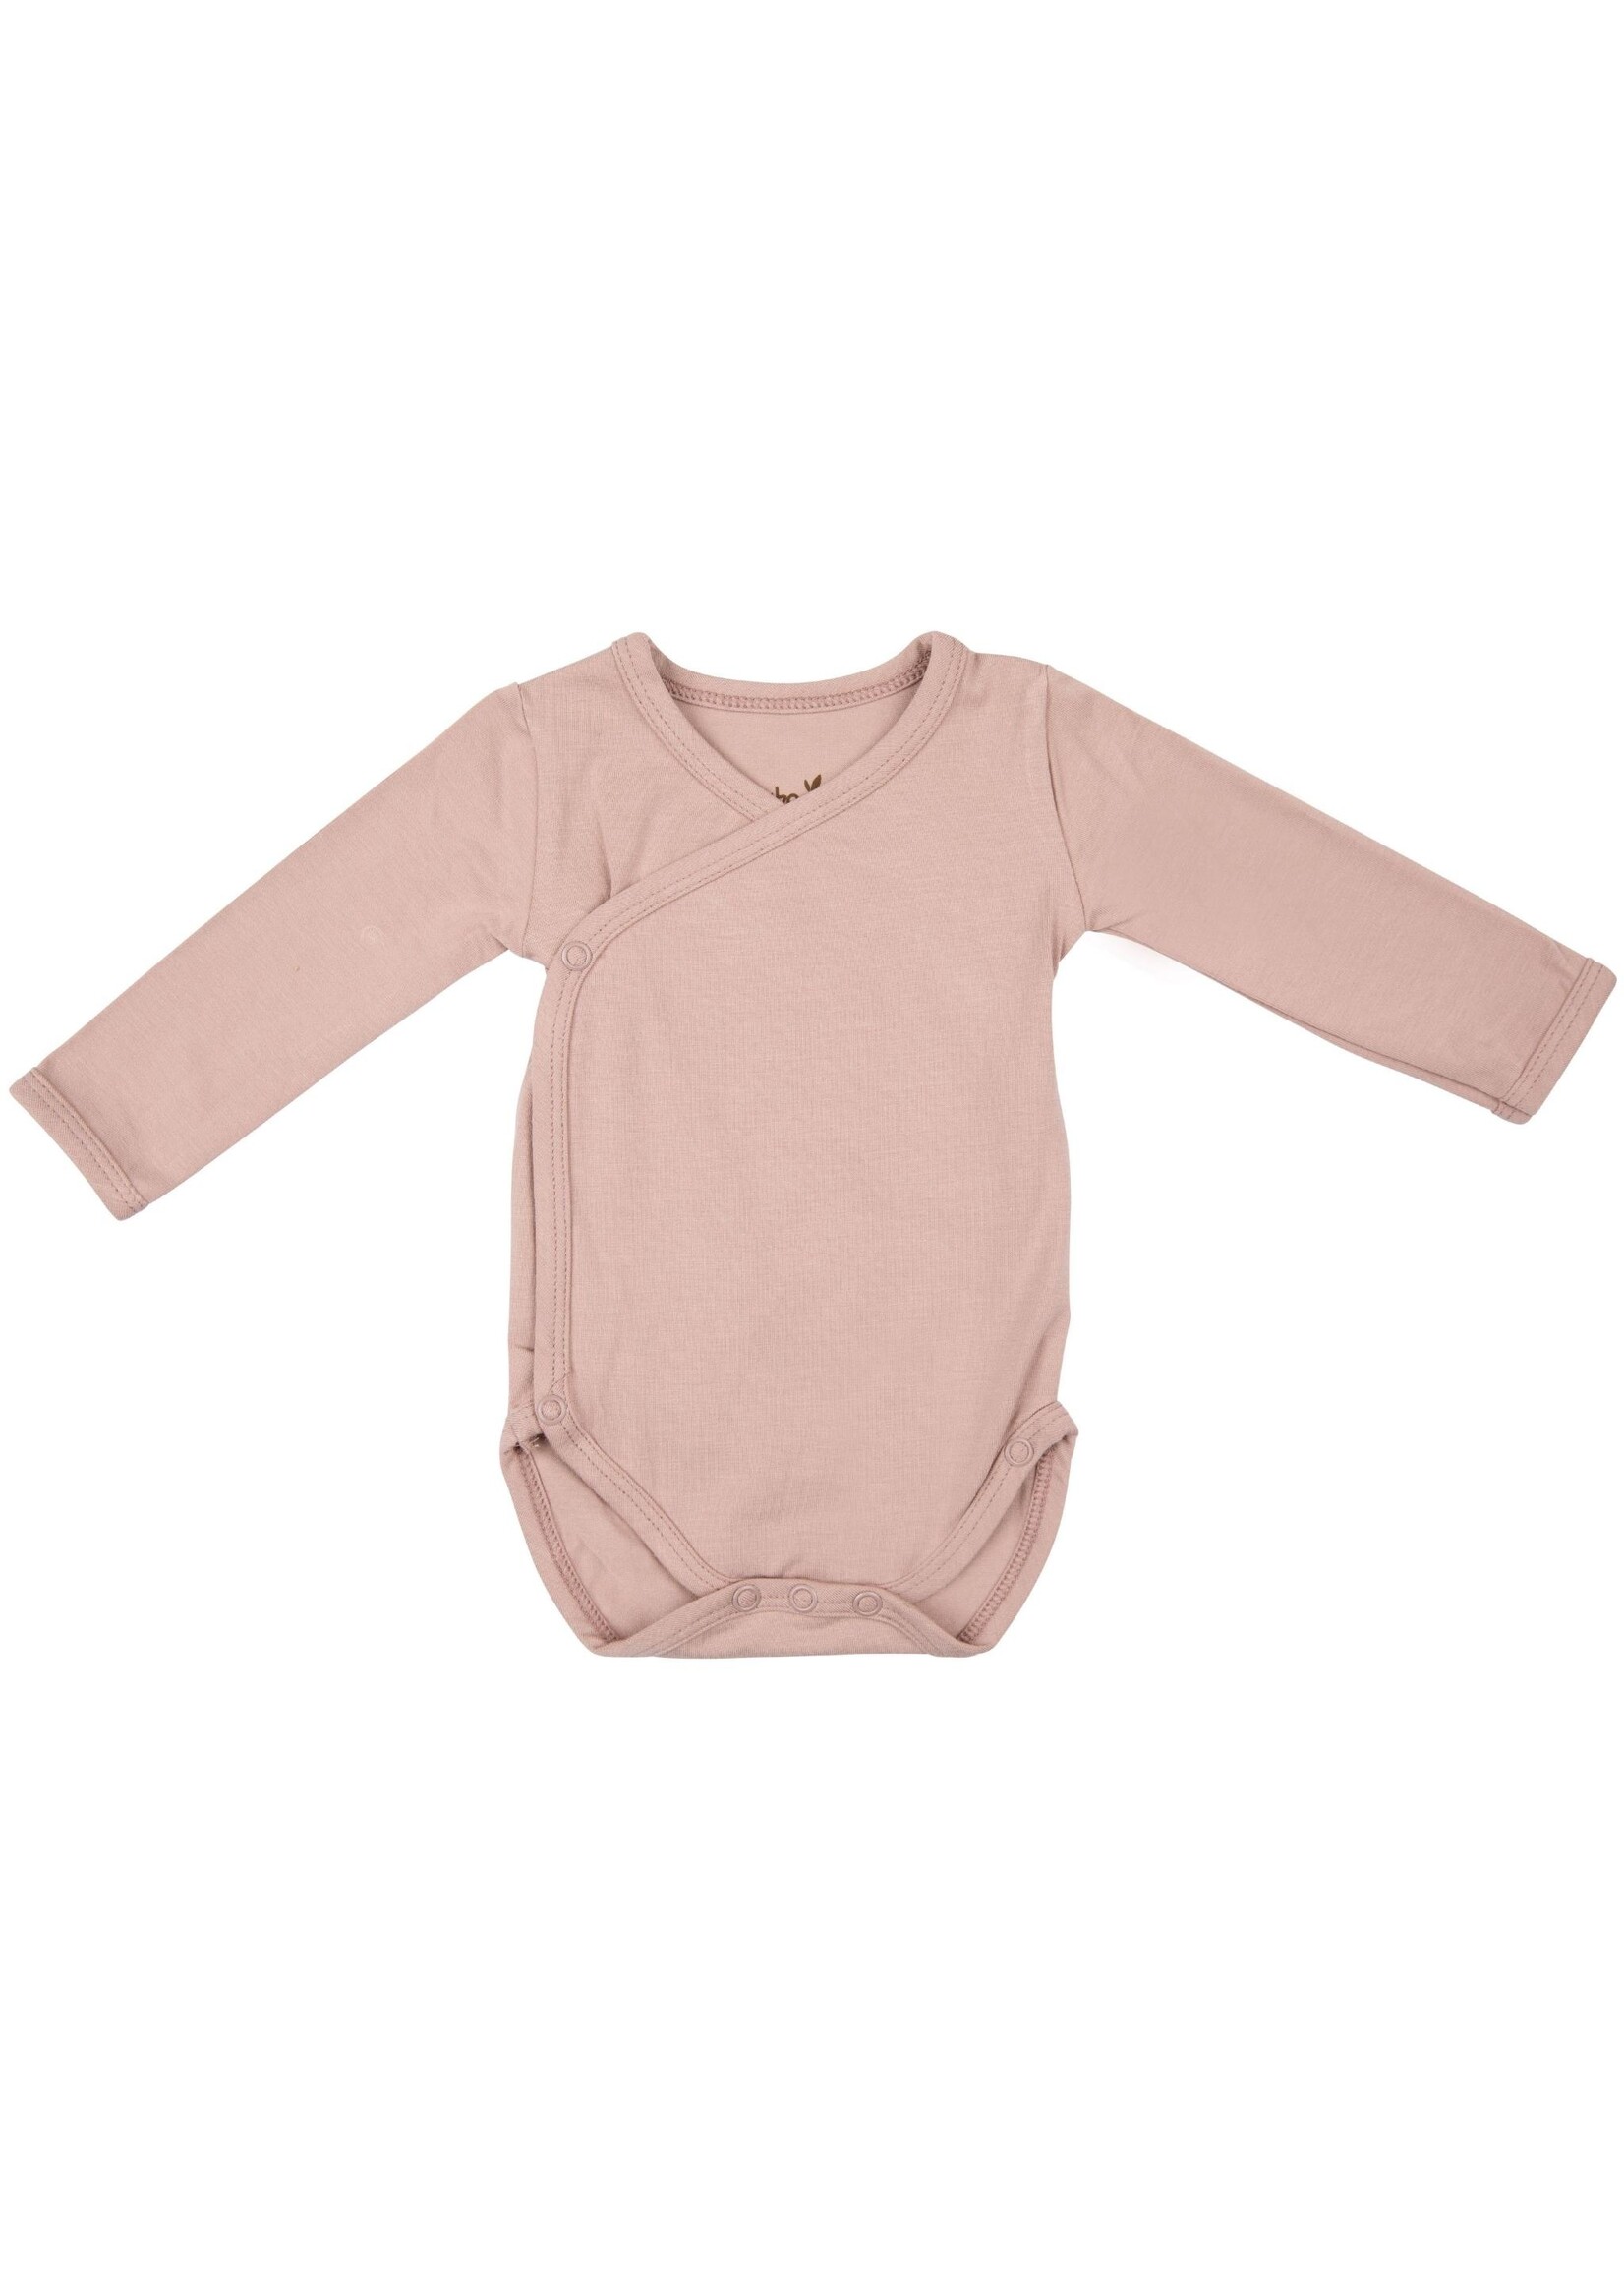 Timboo Timboo Misty rose romper LM mt 50/56